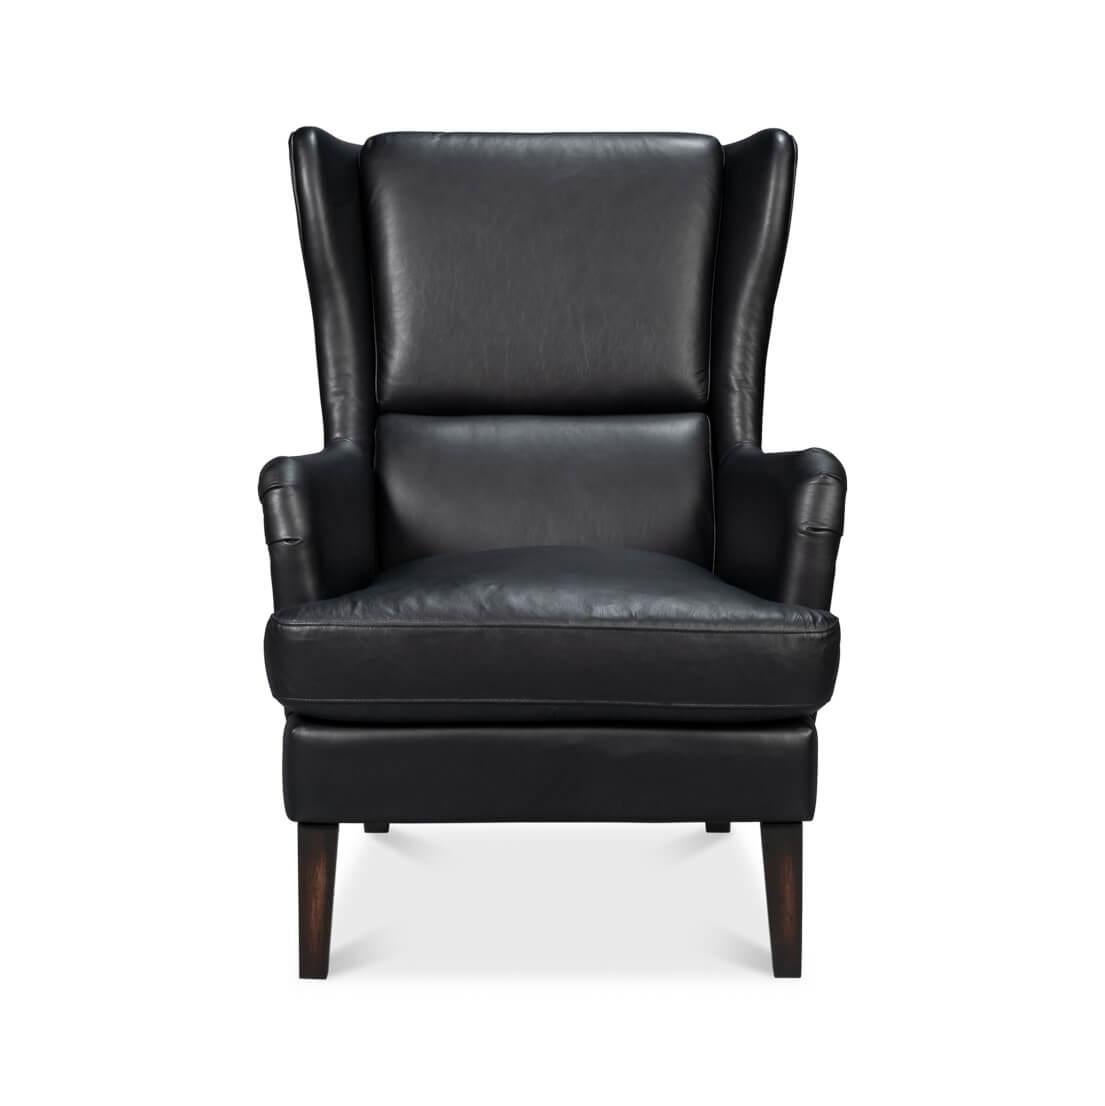 With traditional top grain black onyx leather, with high classic wingback backrest and boxed cushion seat raised on tapered legs.

Dimensions: 28